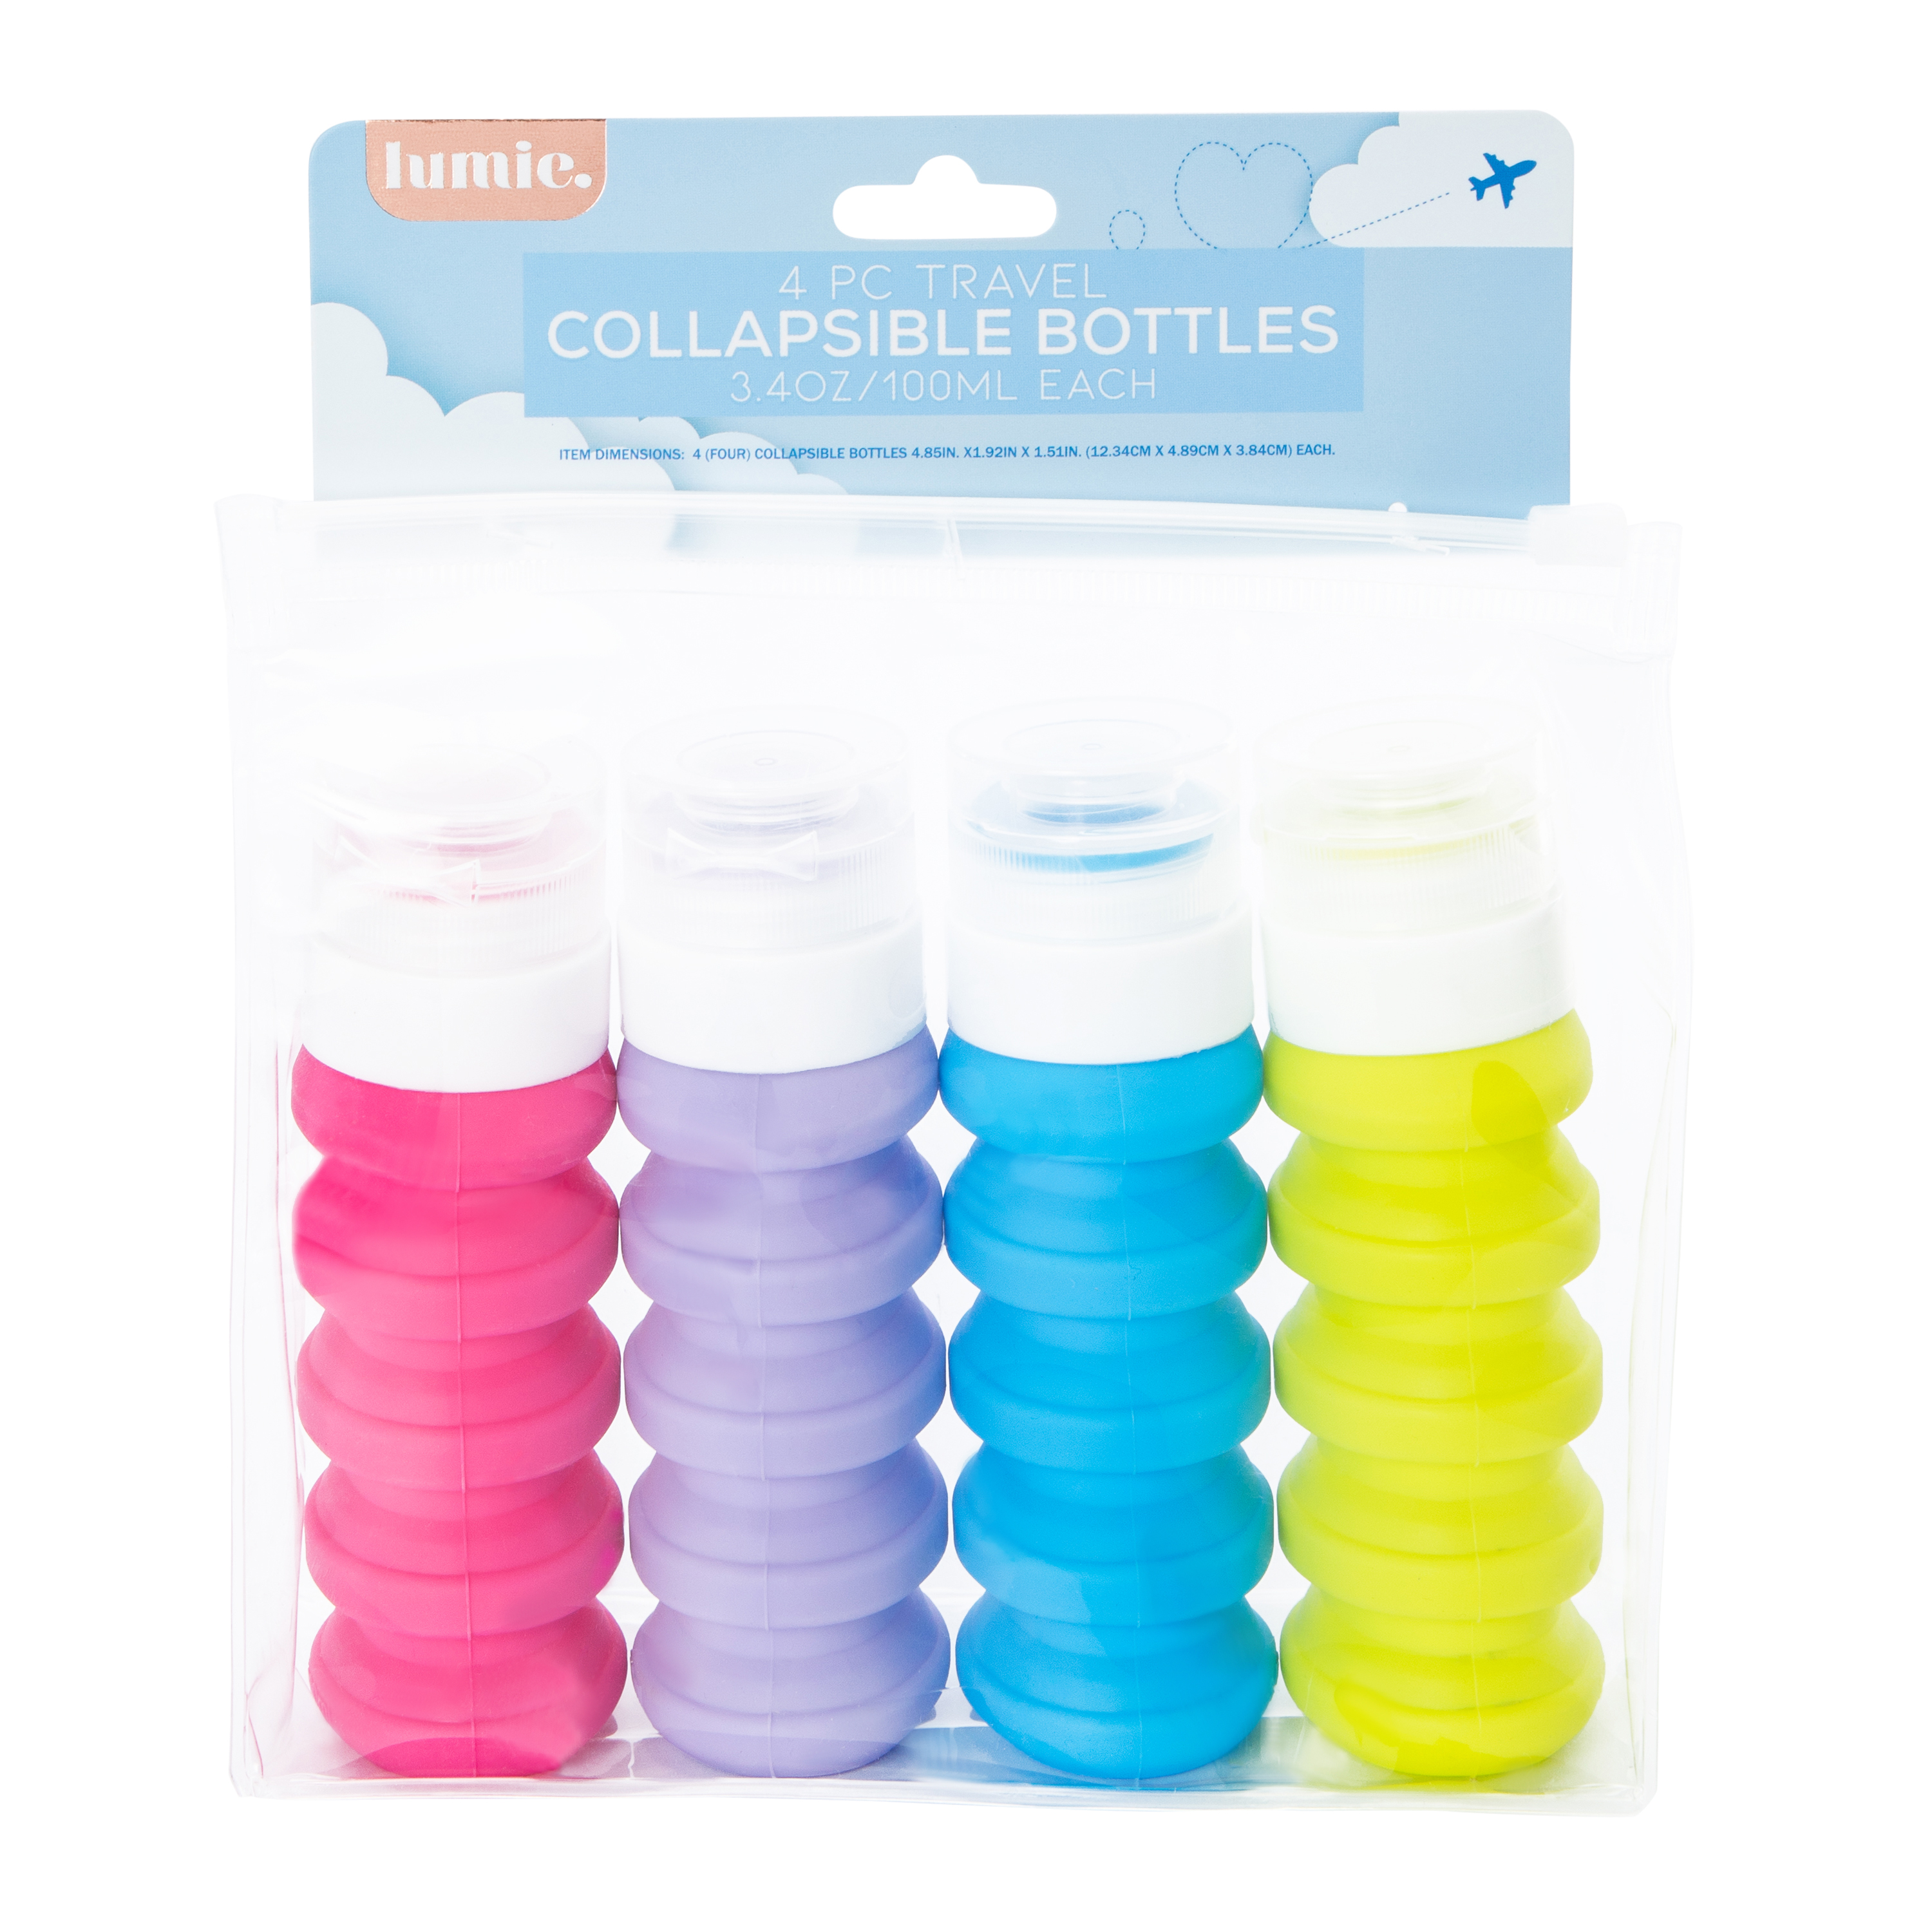 Collapsible Travel Bottles 4-Count